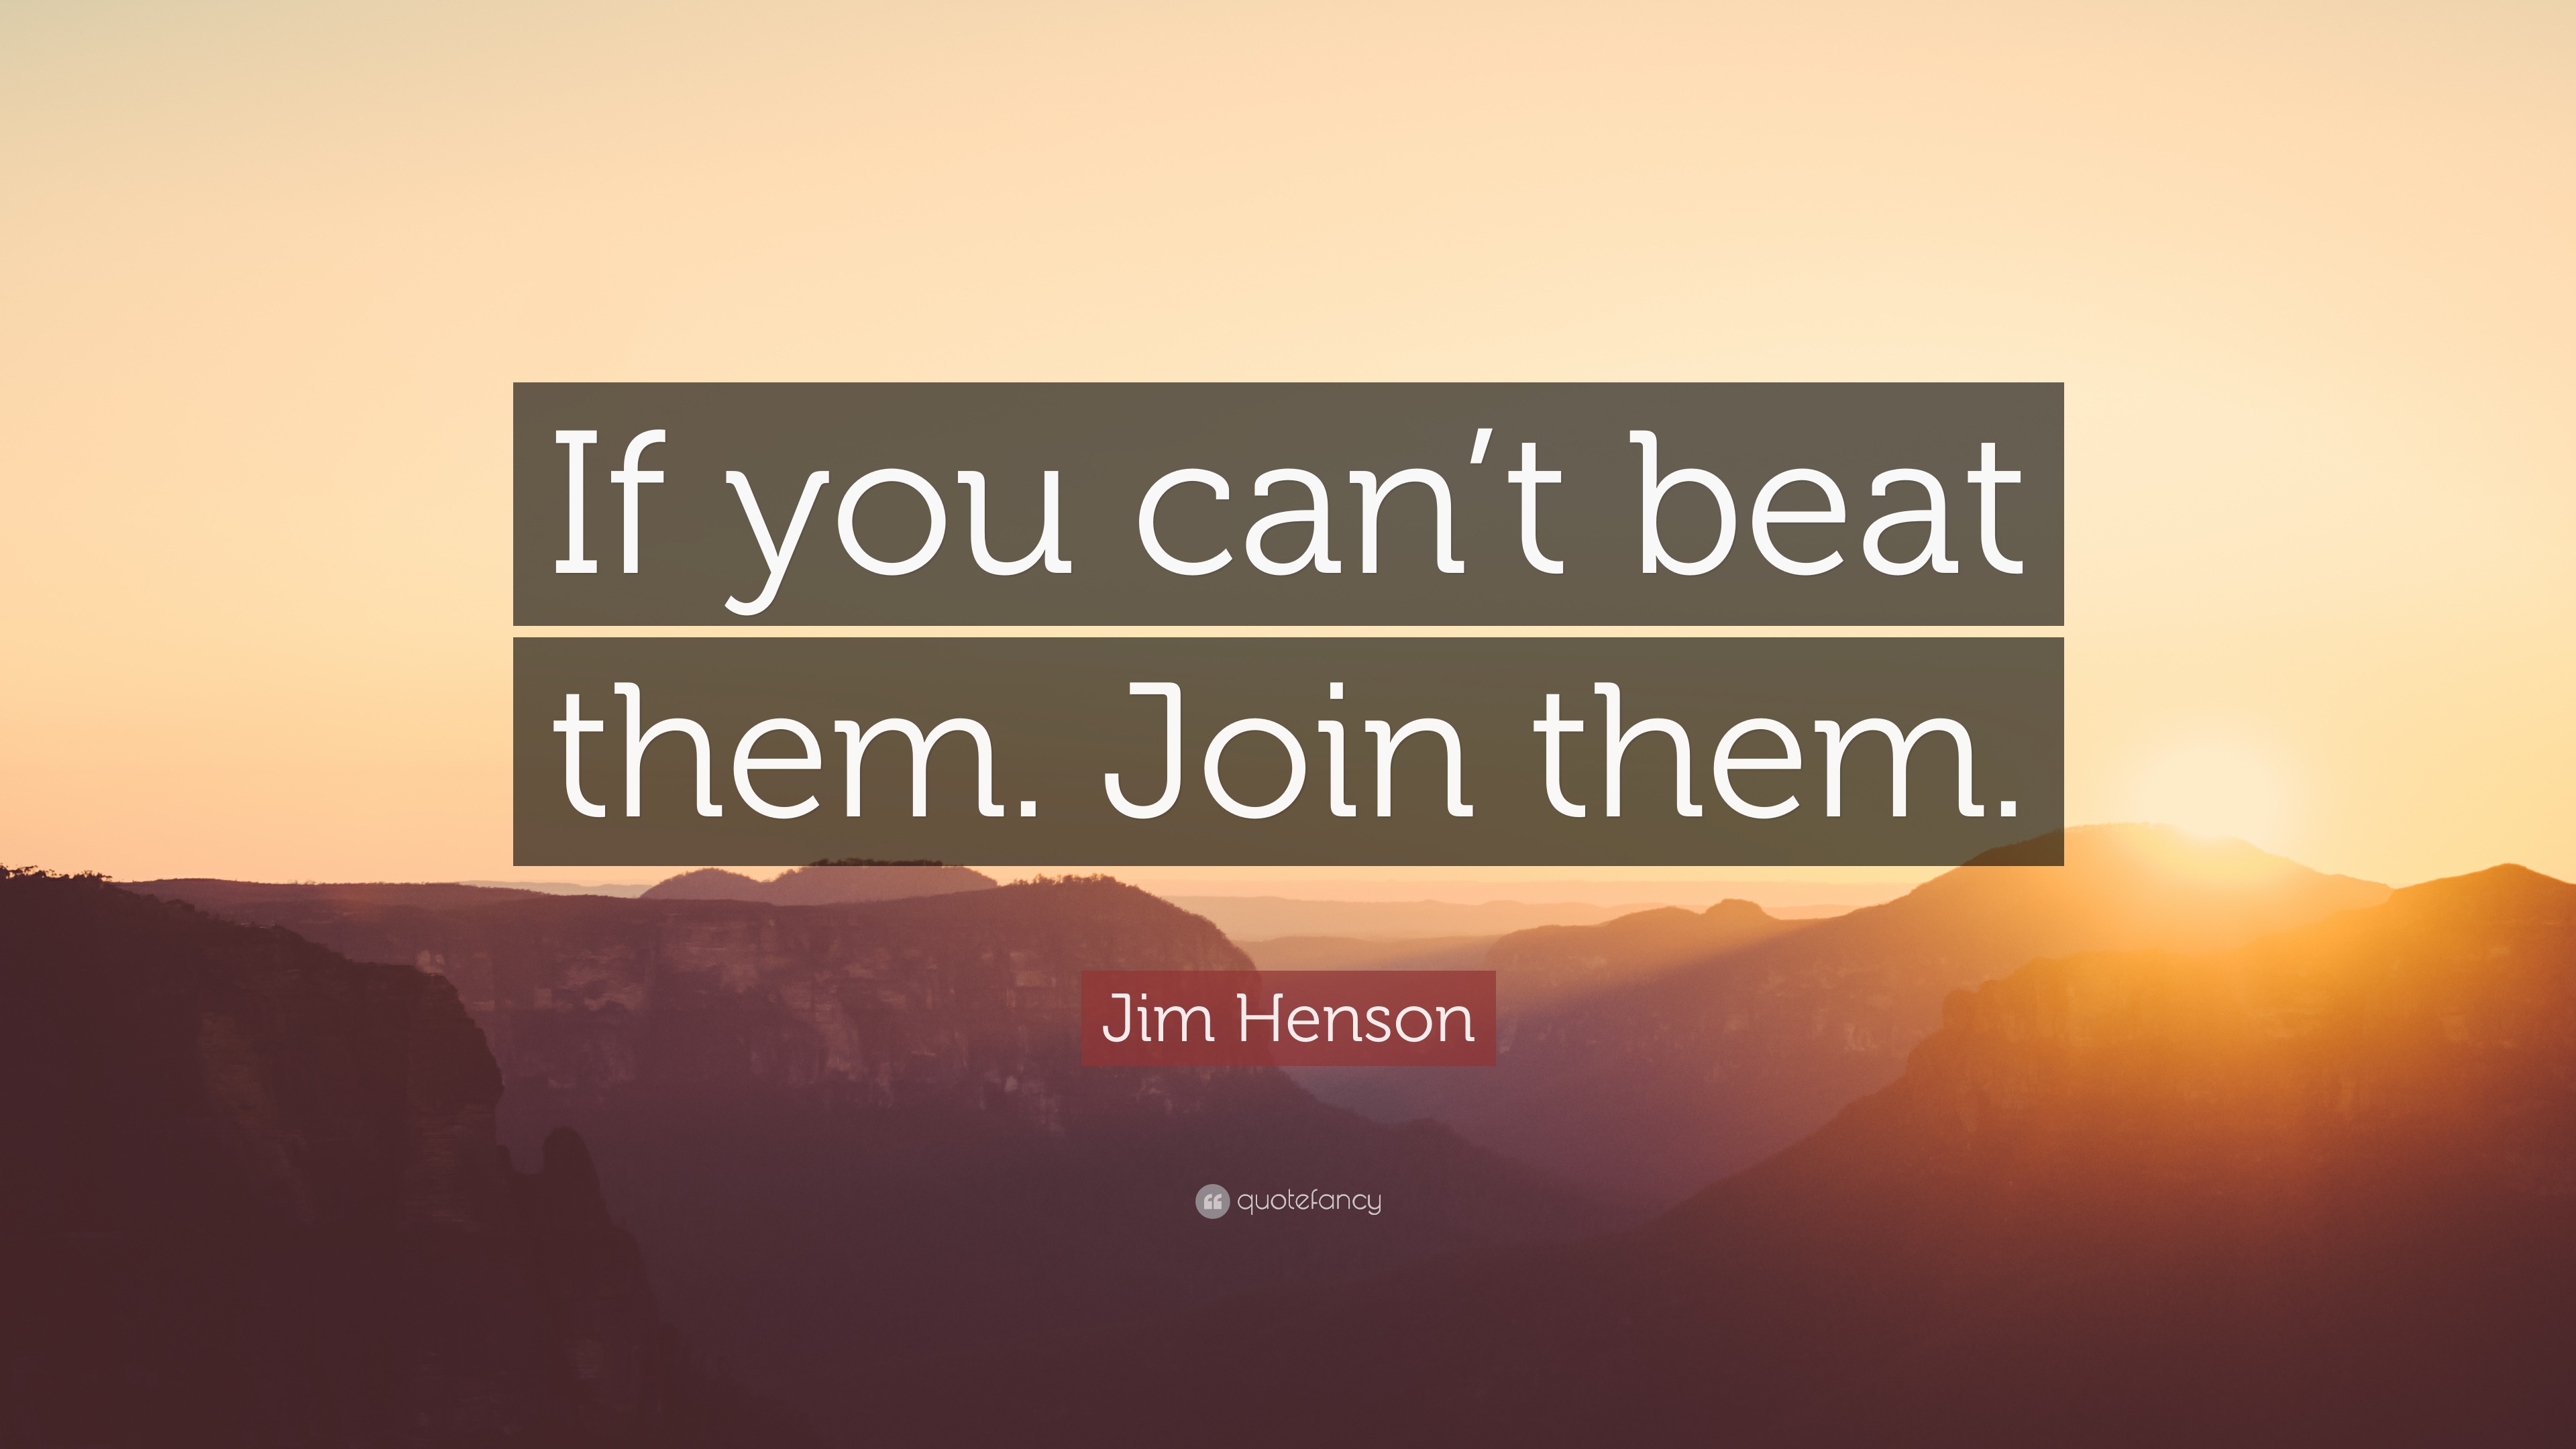 Jim Henson Quote: “If you can’t beat them. Join them.” (11 wallpapers